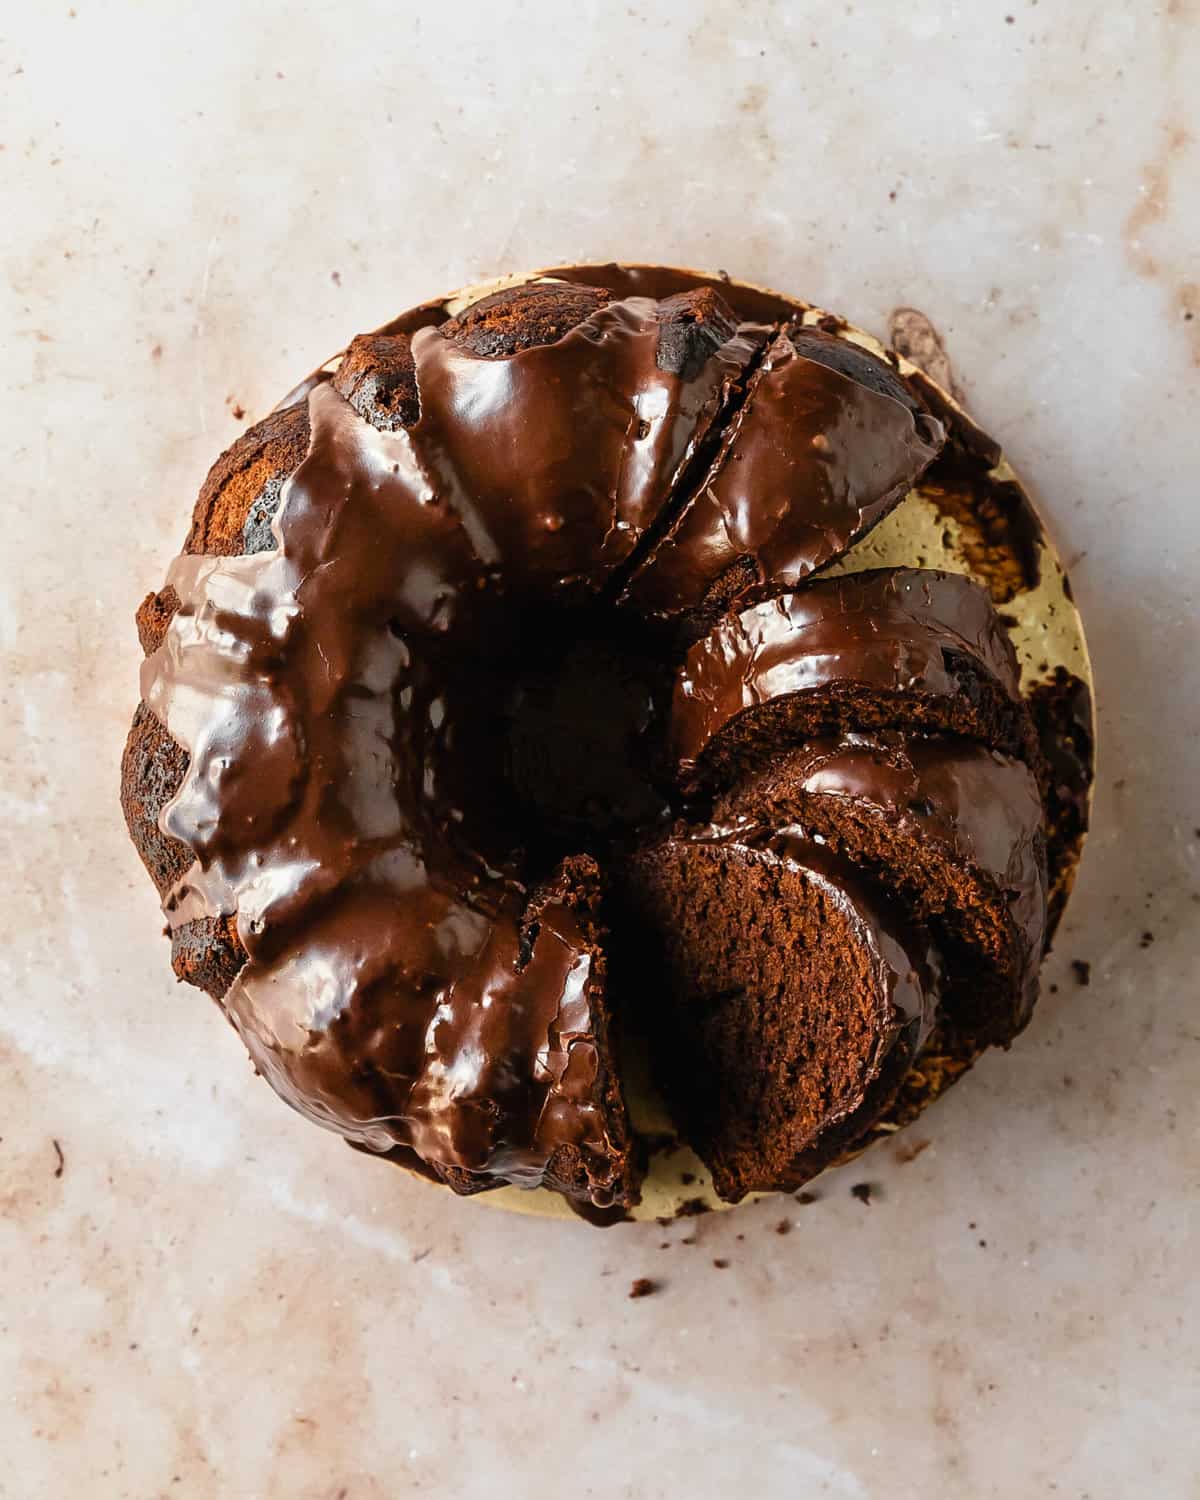 Chocolate pound cake is a moist and velvety old fashioned chocolate pound cake. Top with this chocolate bundt cake with a deliciously decadent chocolate glaze for even more rich chocolate flavor. This easy to make double chocolate pound cake makes the perfect simple and delicious dessert. 